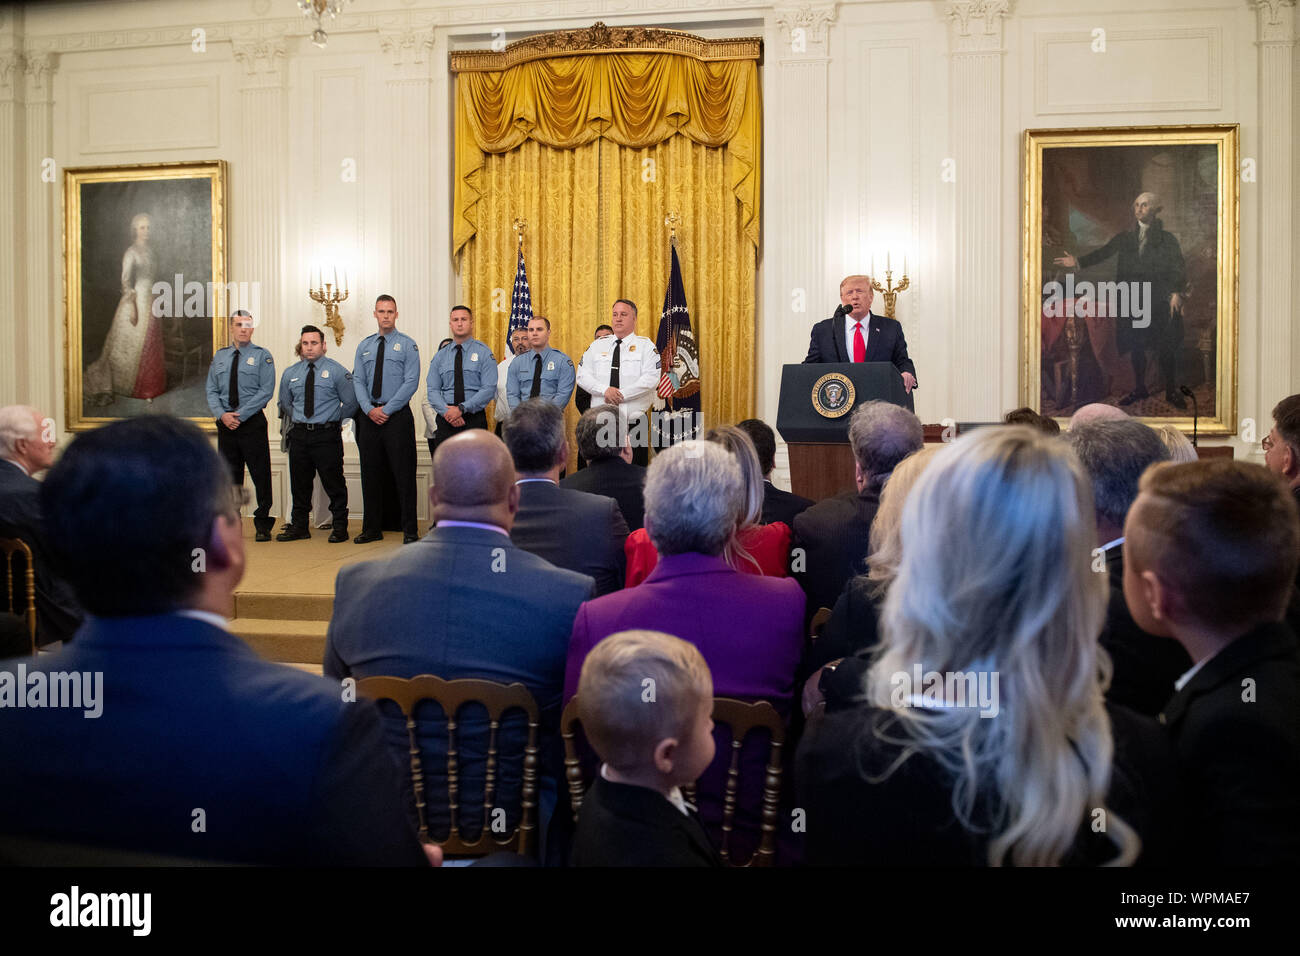 Washington, United States. 09th Sep, 2019. President Donald Trump delivers remarks before awarding the Public Safety Officer Medal of Valor and Heroic Commendations, during a ceremony in the East Room at the White House in Washington, DC on Monday, September 9, 2019. Trump recognized the six Dayton police officers who stoped a mass shooting on August 4th and honored 5 civilians who helped during a mass shooting at a Walmart in El Paso the day before. Photo by Kevin Dietsch/UPI Credit: UPI/Alamy Live News Stock Photo